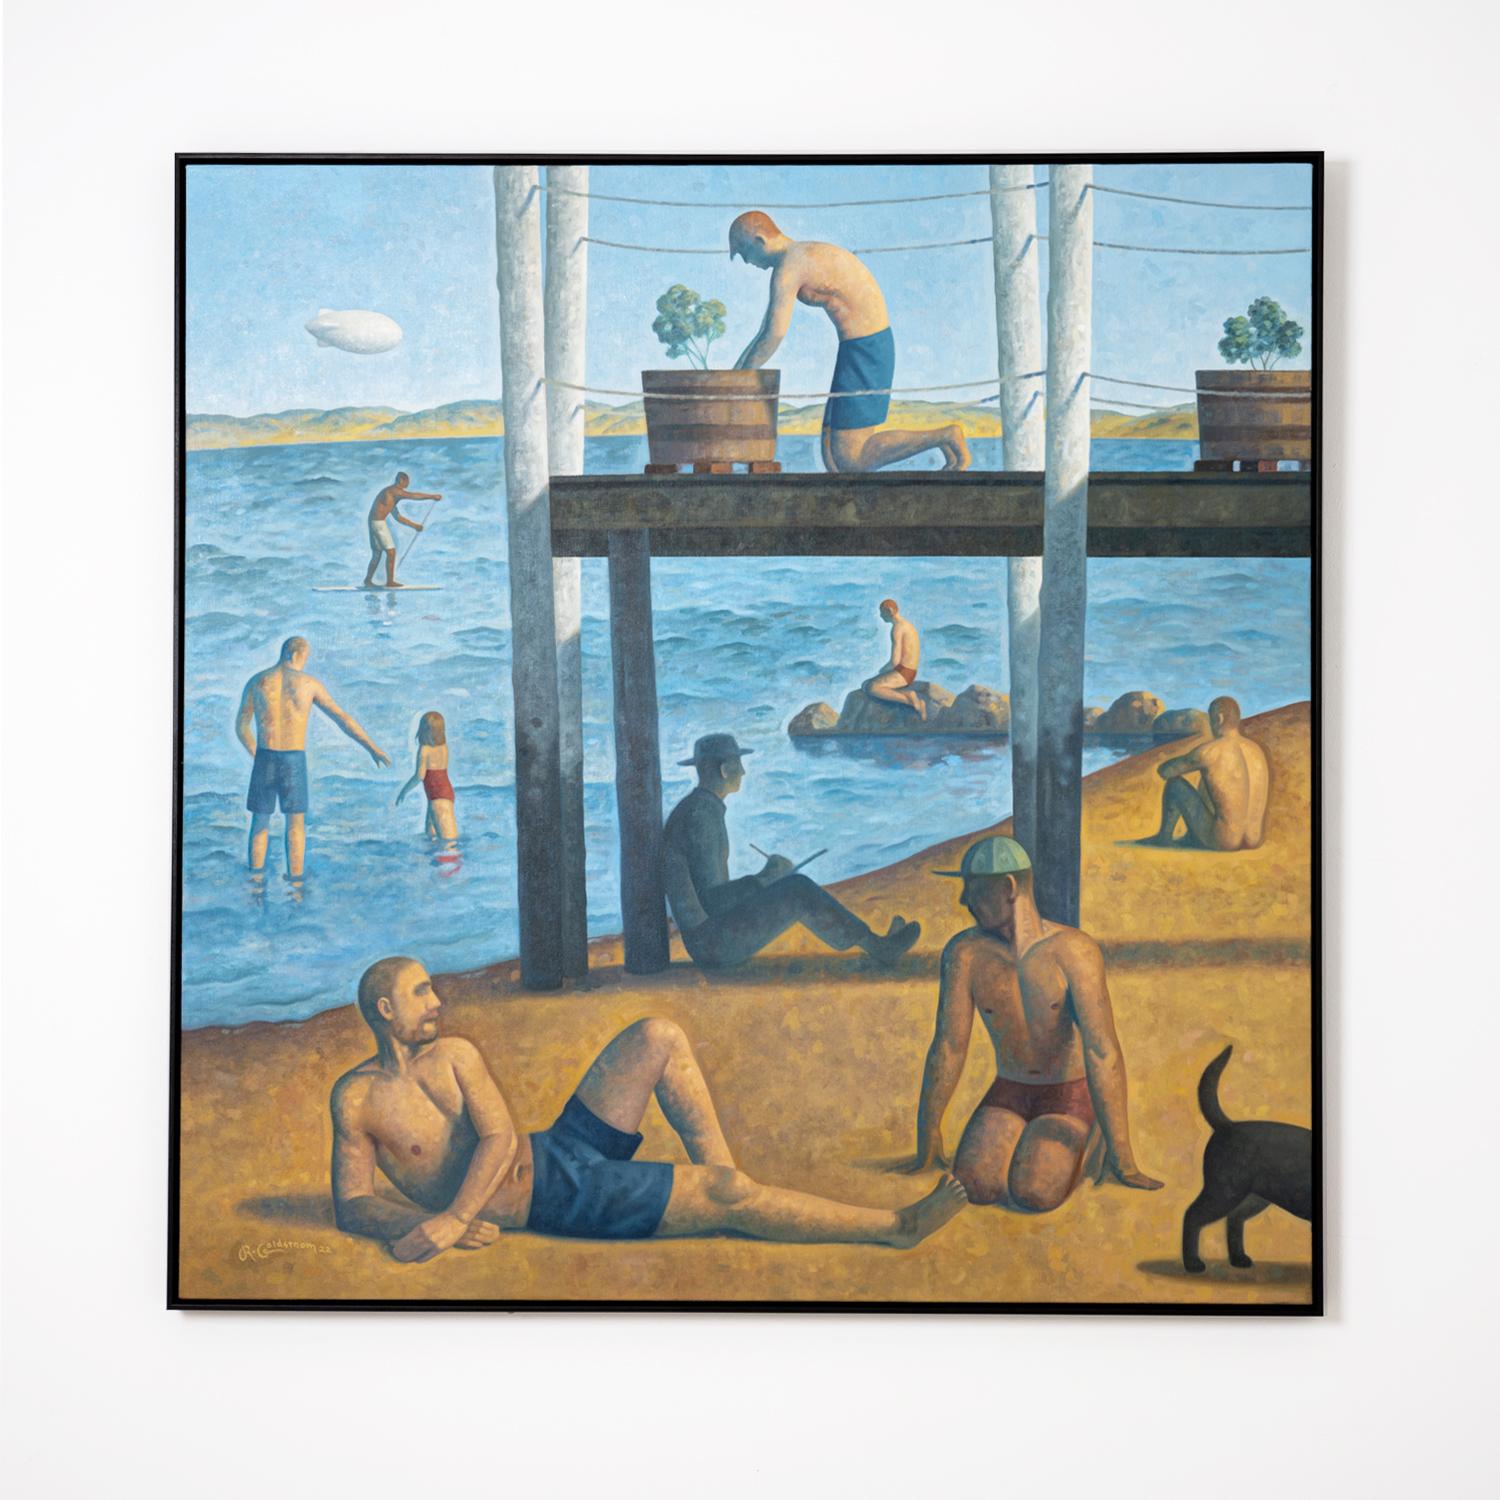 Provincetown Bay (Seurat Inspired Landscape Painting of Figures on a Beach) For Sale 1